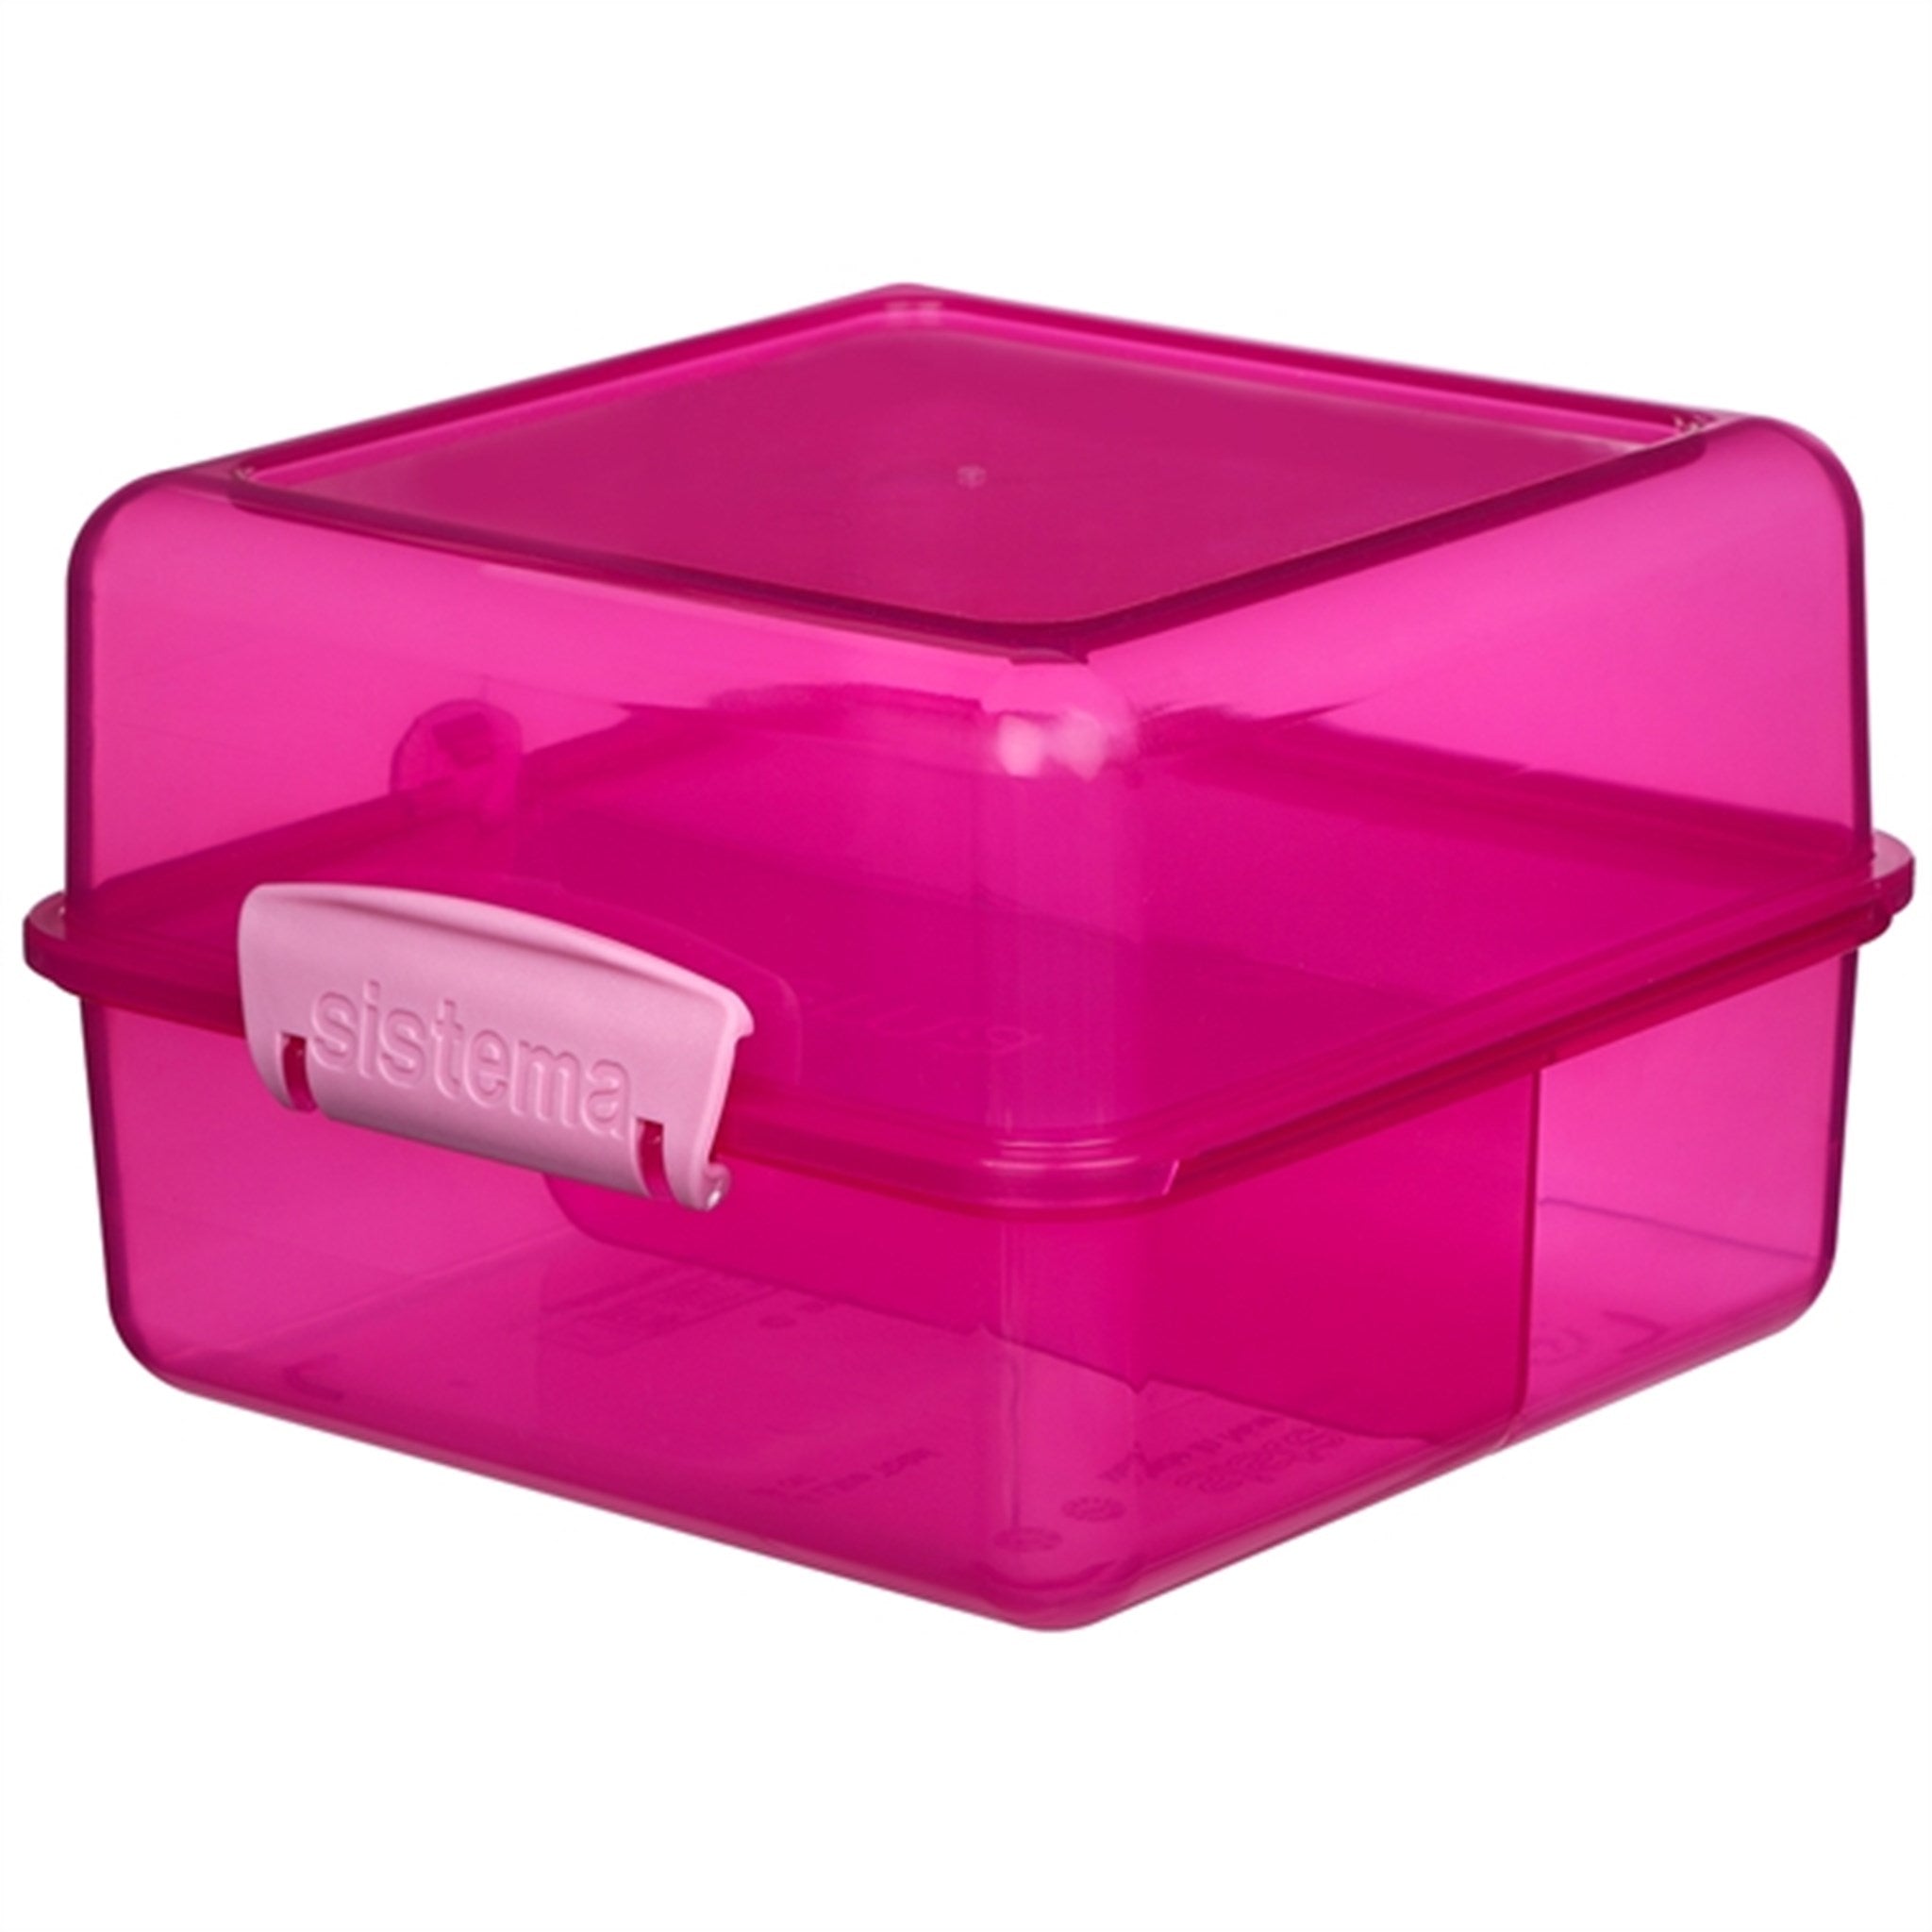 Sistema Lunch Cube Lunch Box 1,4 L Pink